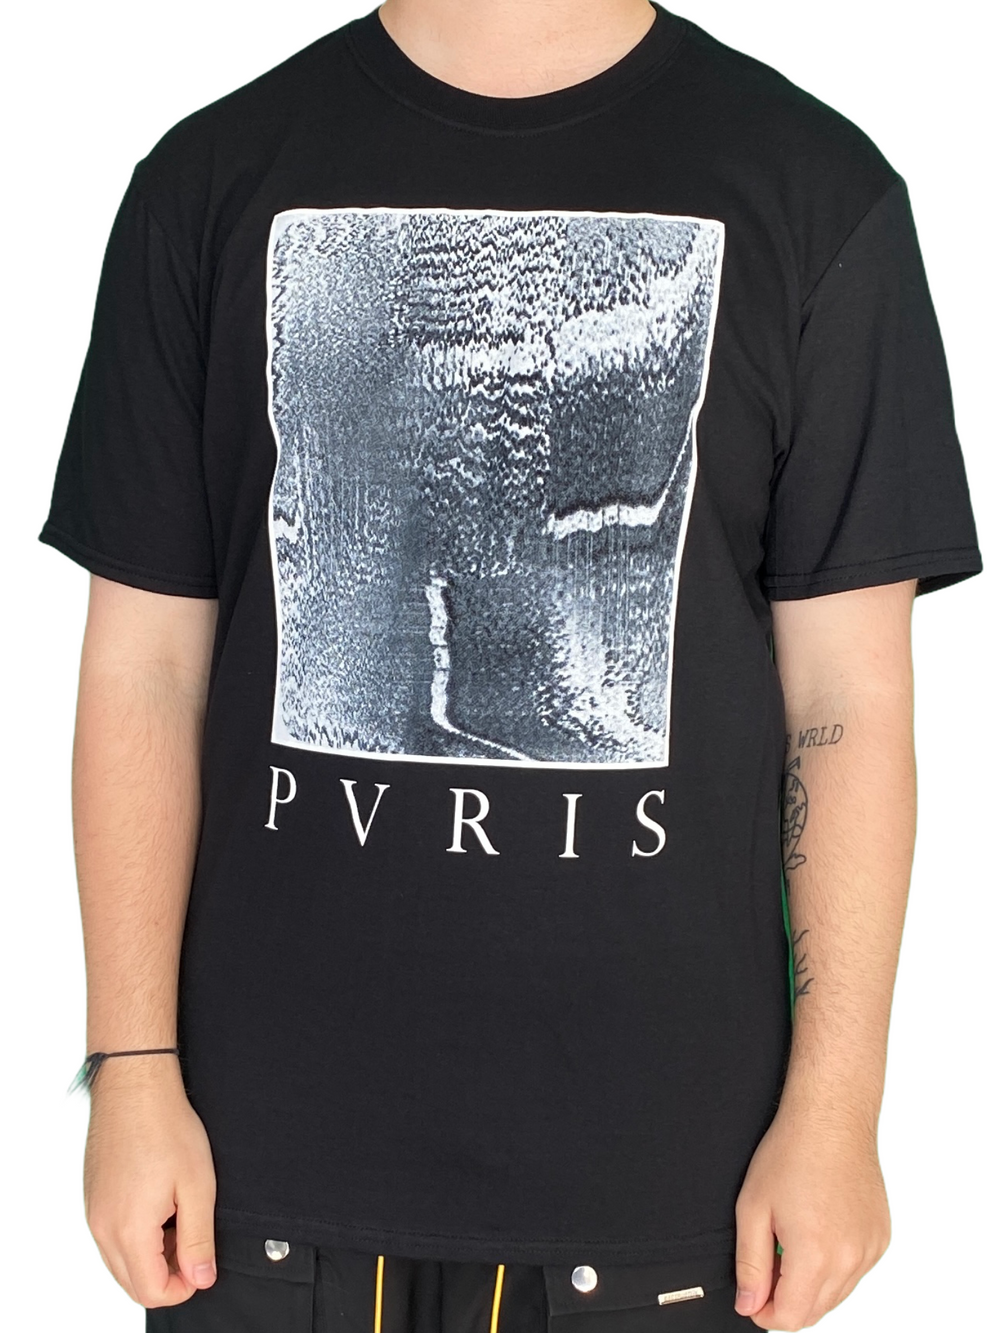 PVRIS Static Official T Shirt Brand New Various Sizes